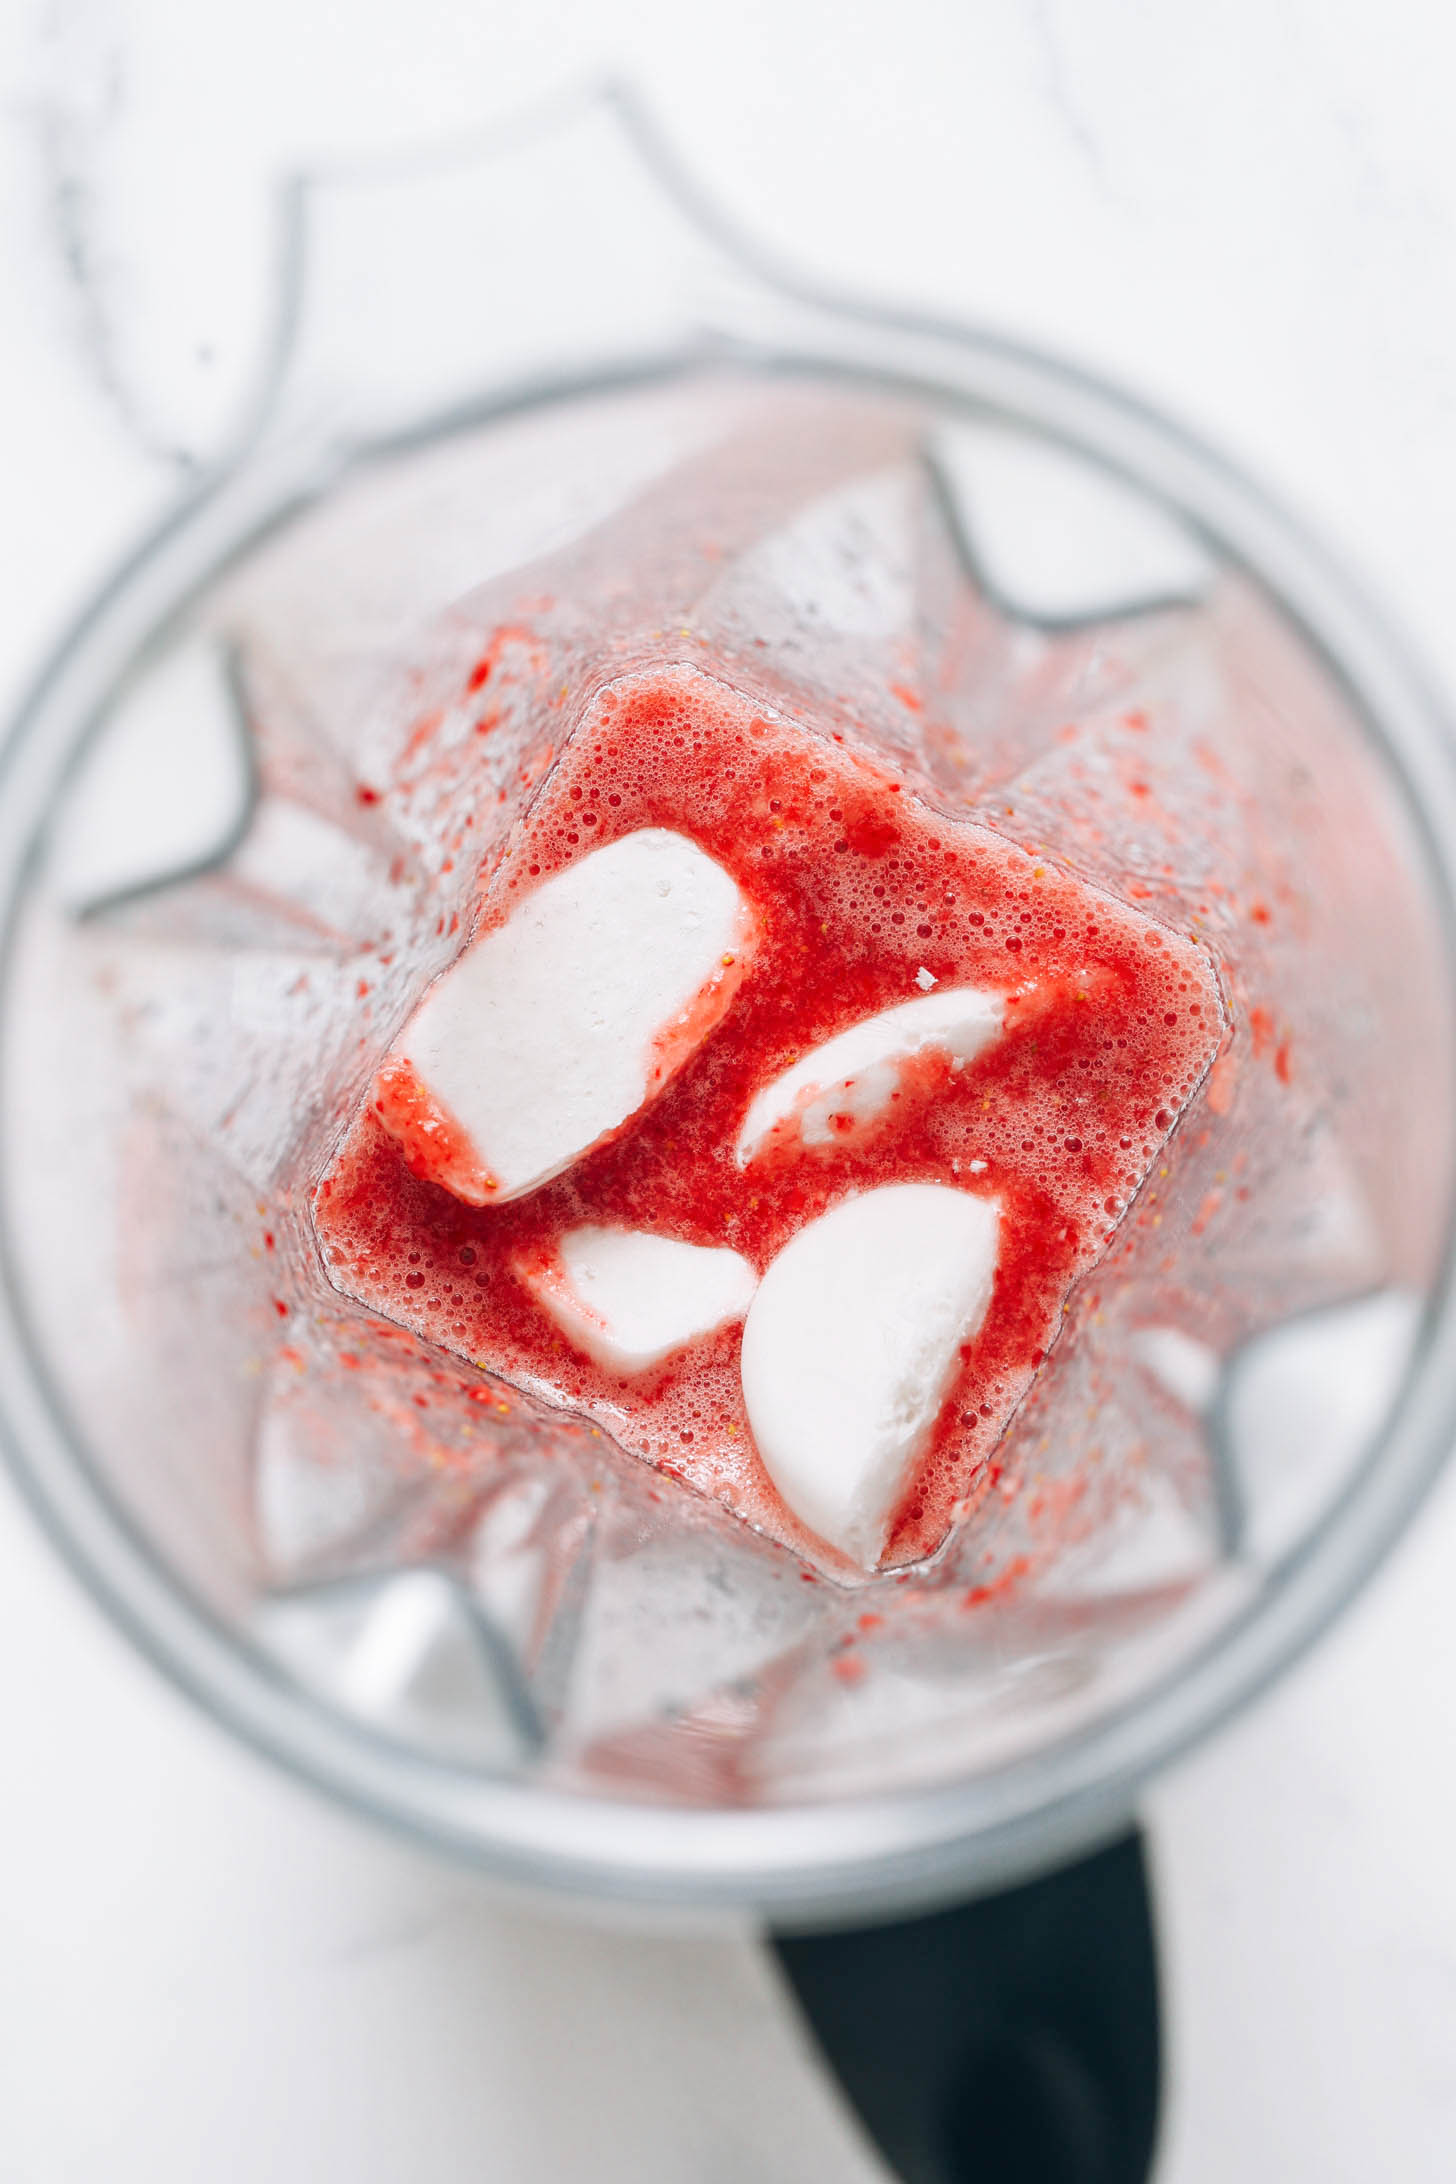 Coconut milk ice cubes in a blender to show how to make a strawberry milkshake without ice cream